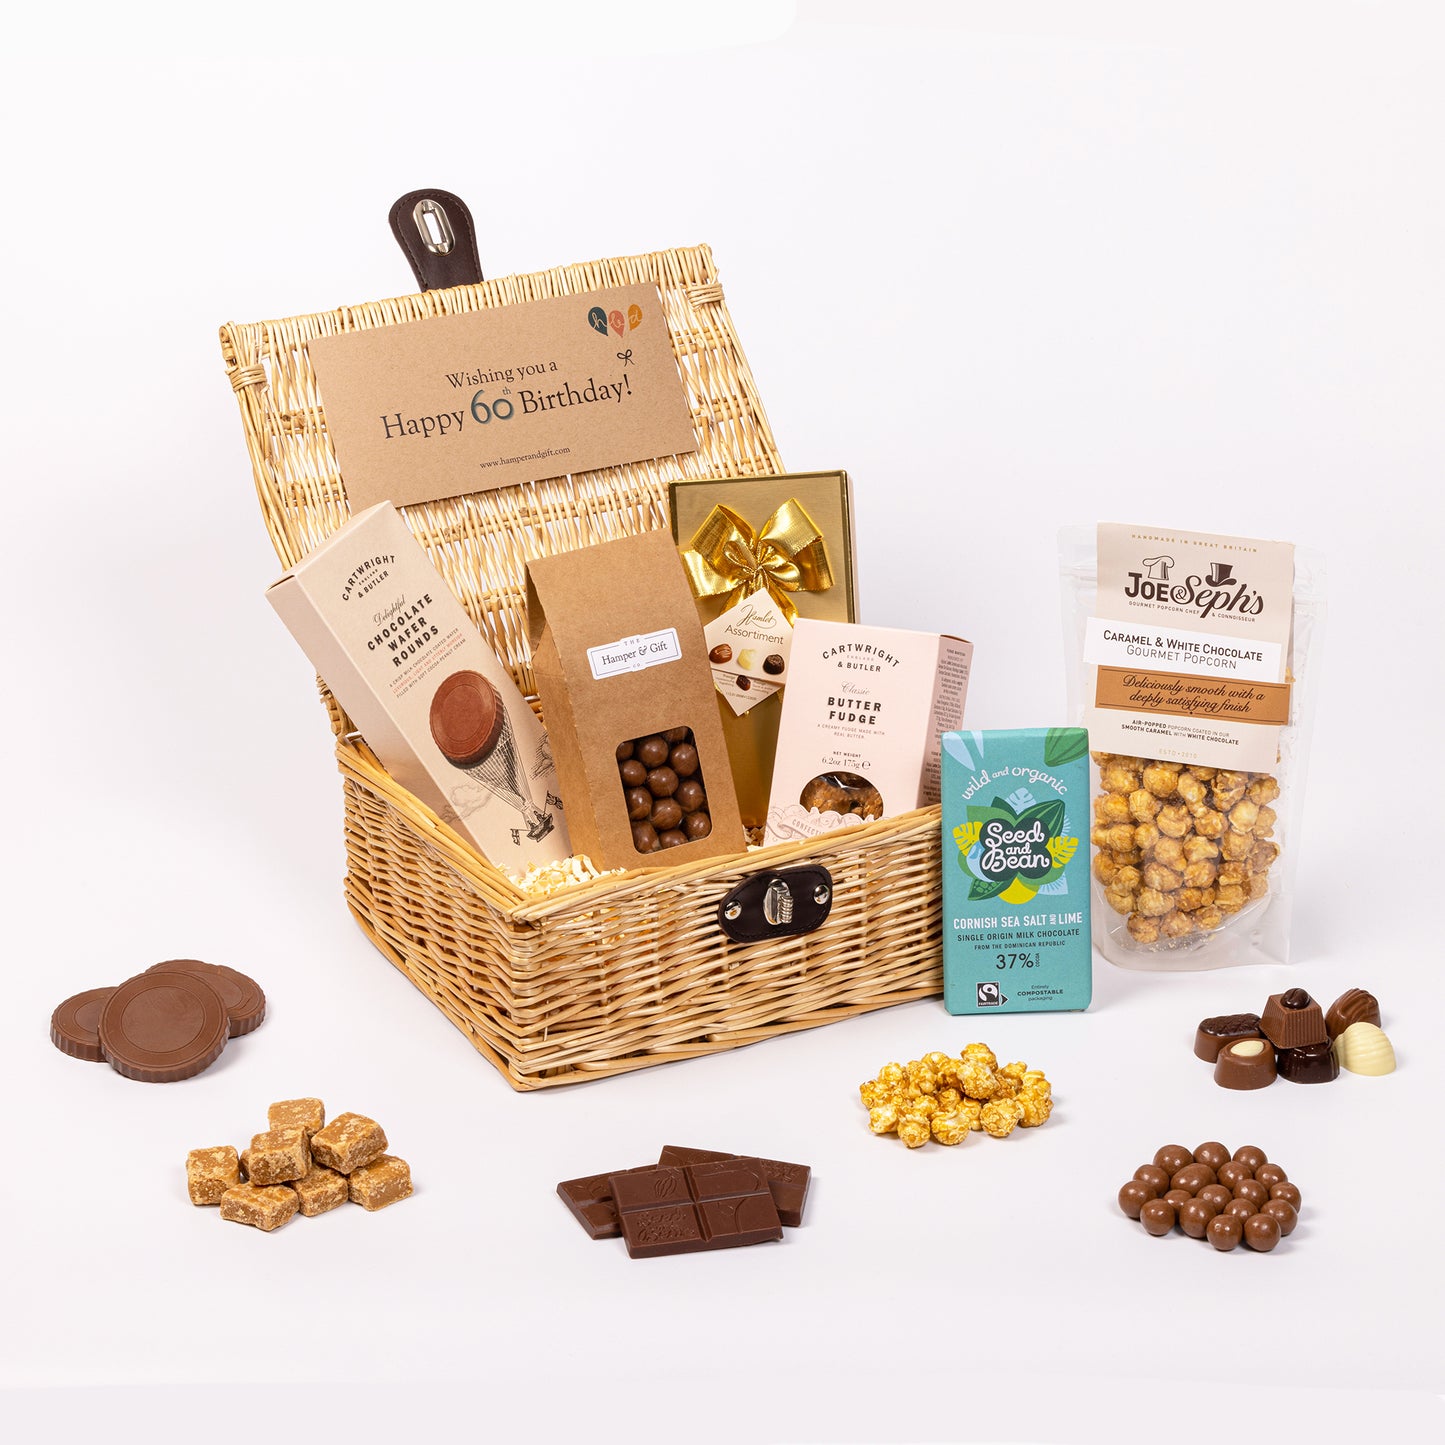 60th Birthday Chocolate & Fudge Hamper filled with a variety of chocolate, fudge, biscuit and gourmet popcorn